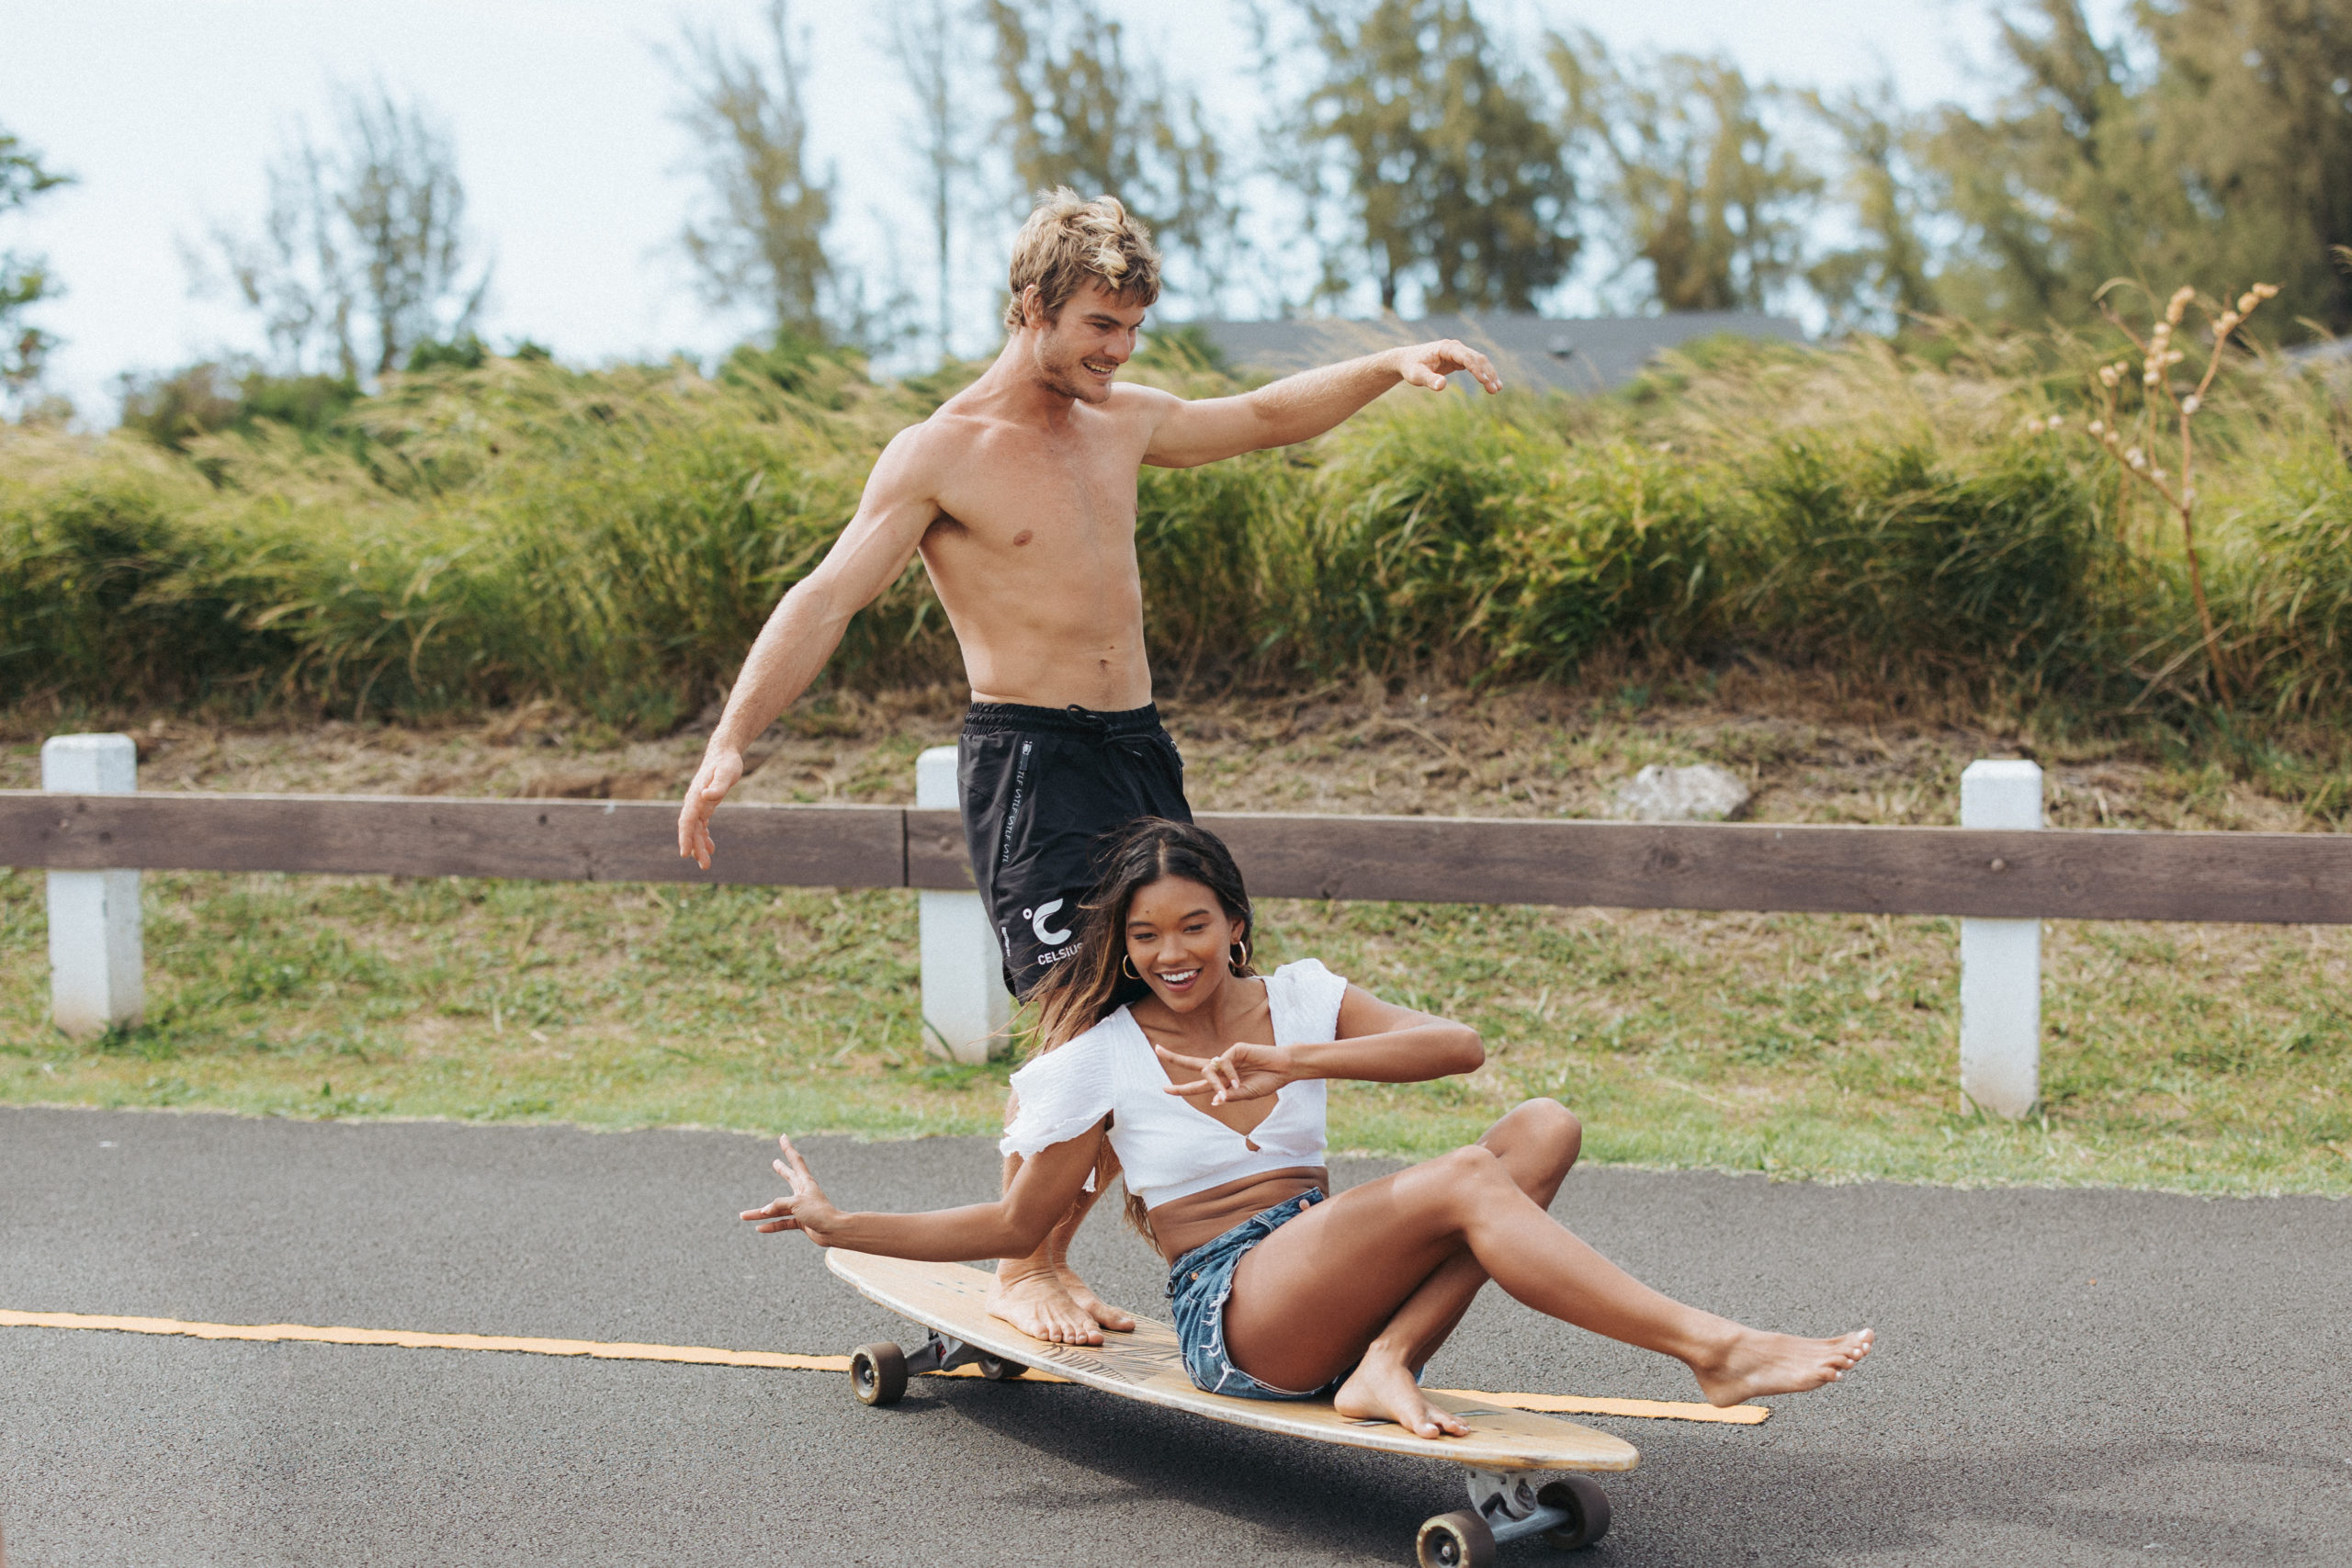 couple riding on a longboard